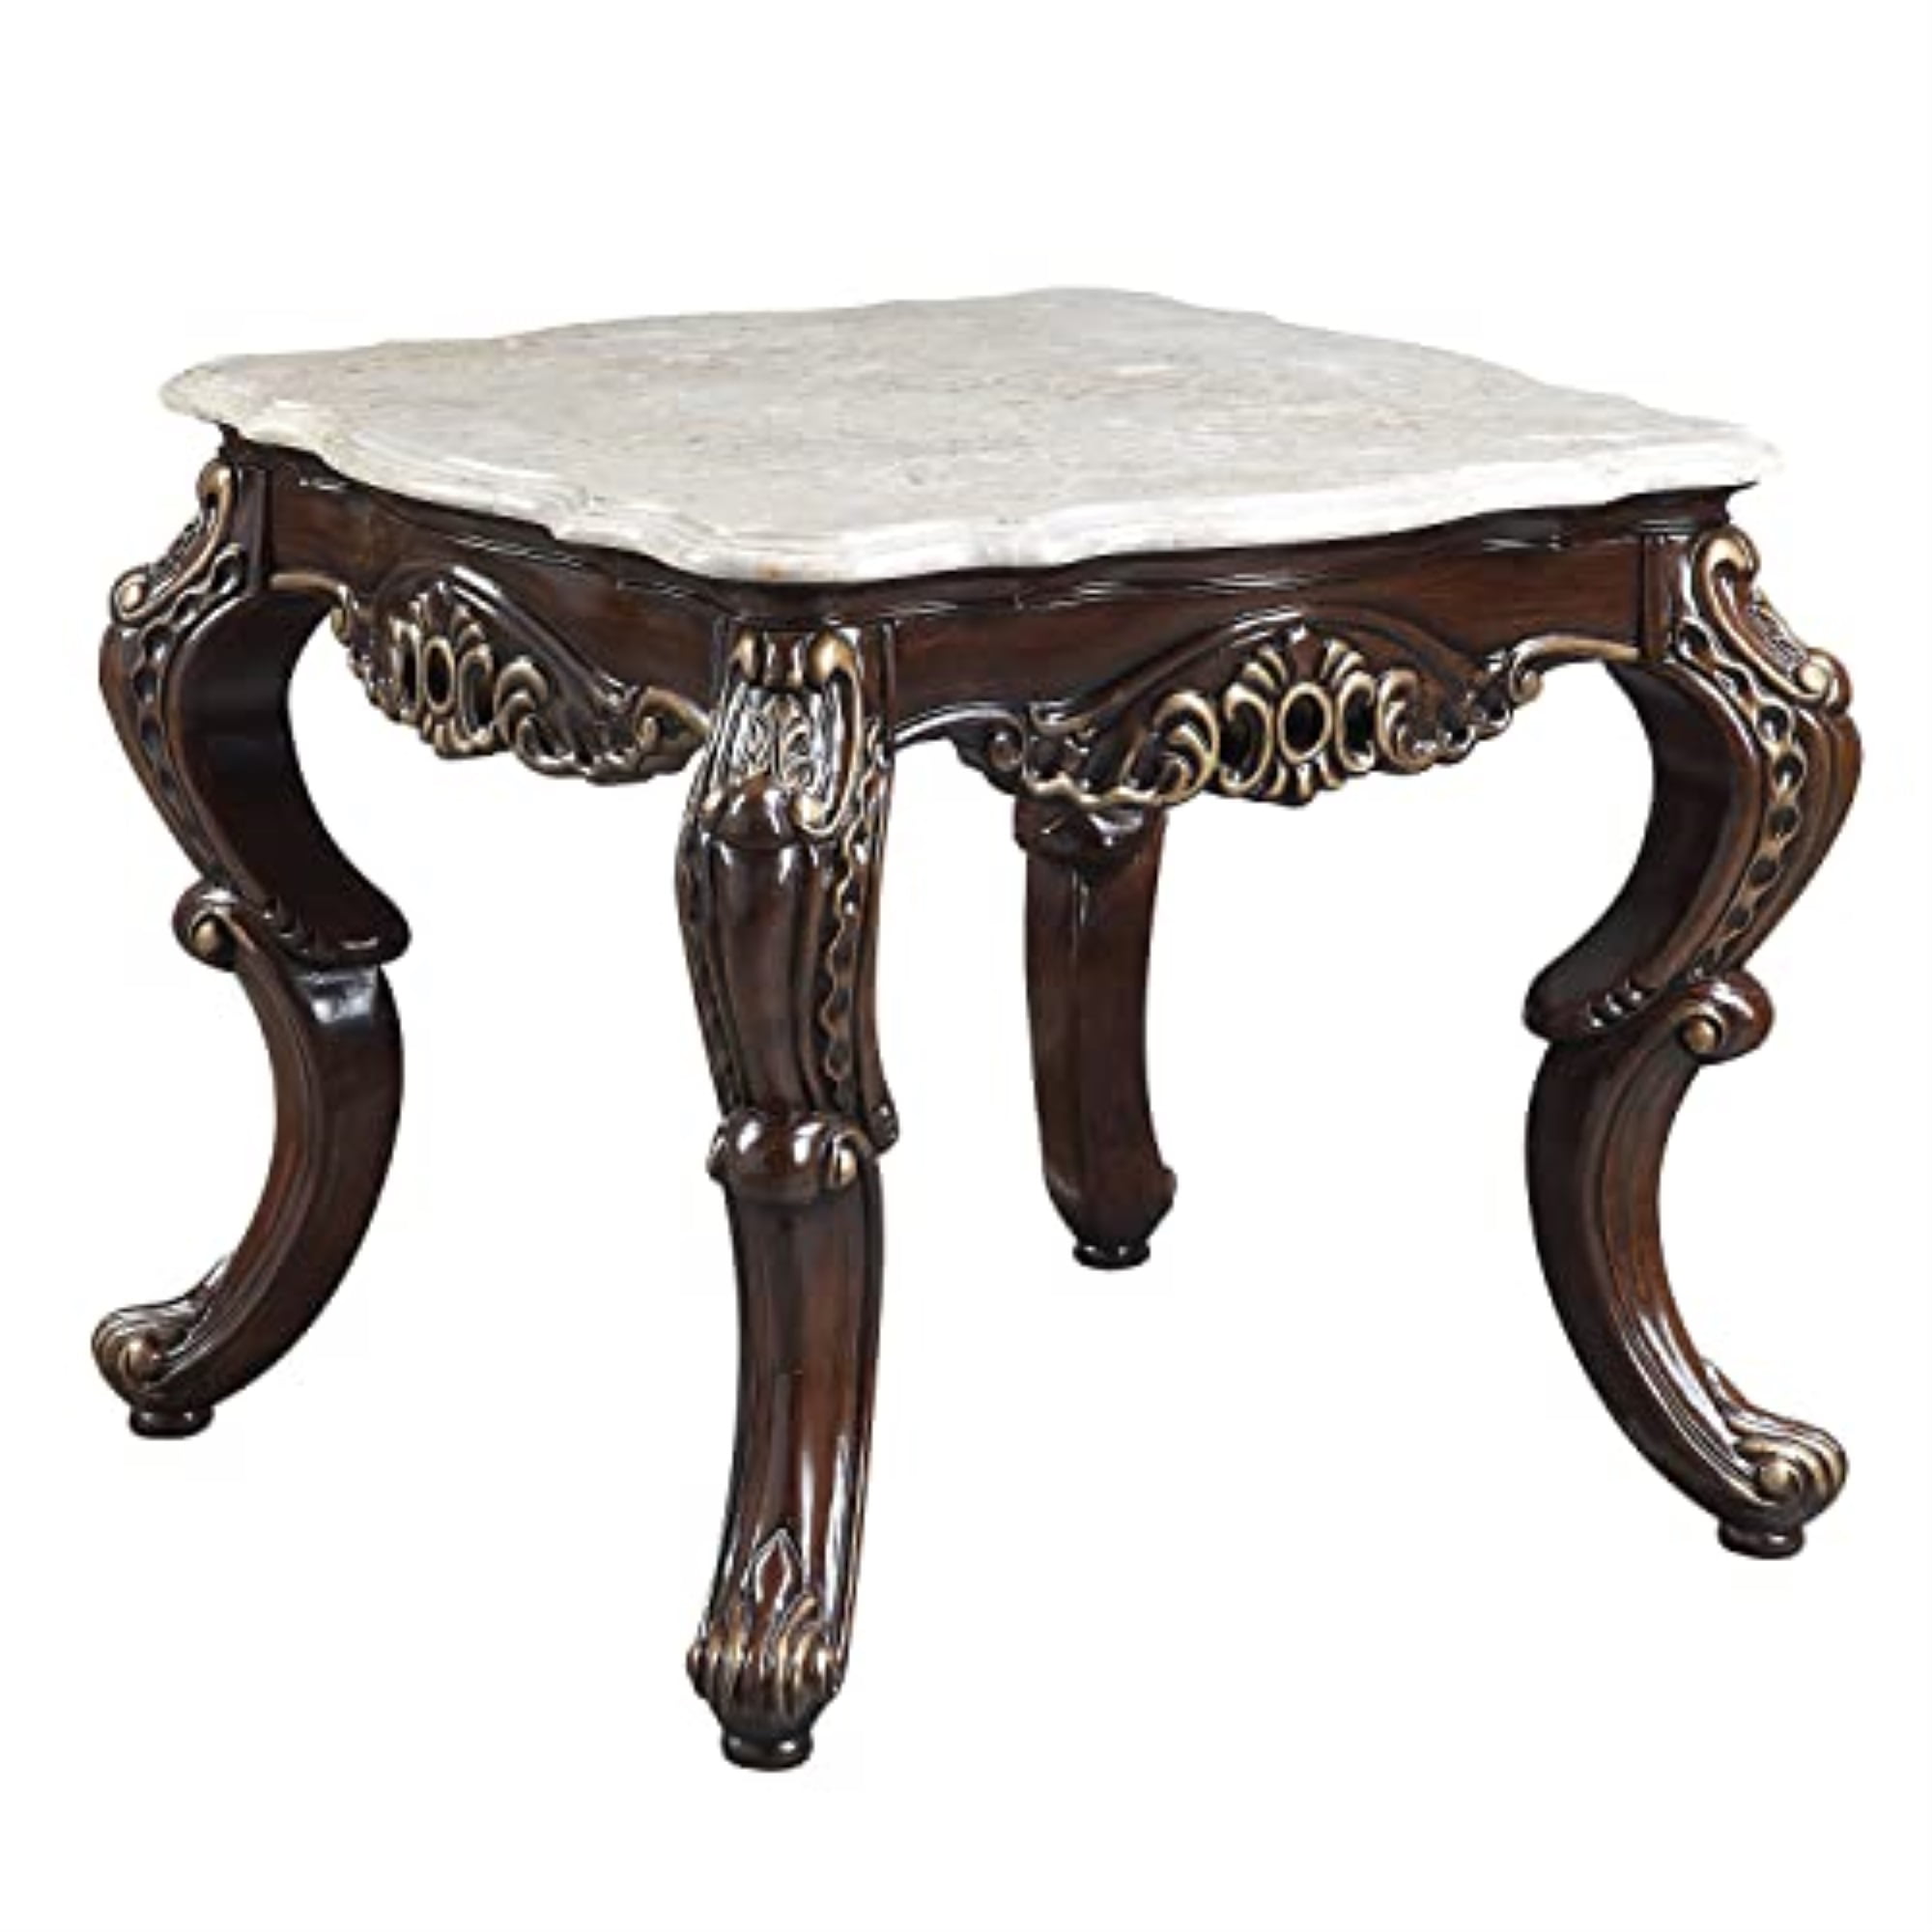 New Stunning Patina Side Table With Gold Finish Metal Legs & A Marble Effect Top 